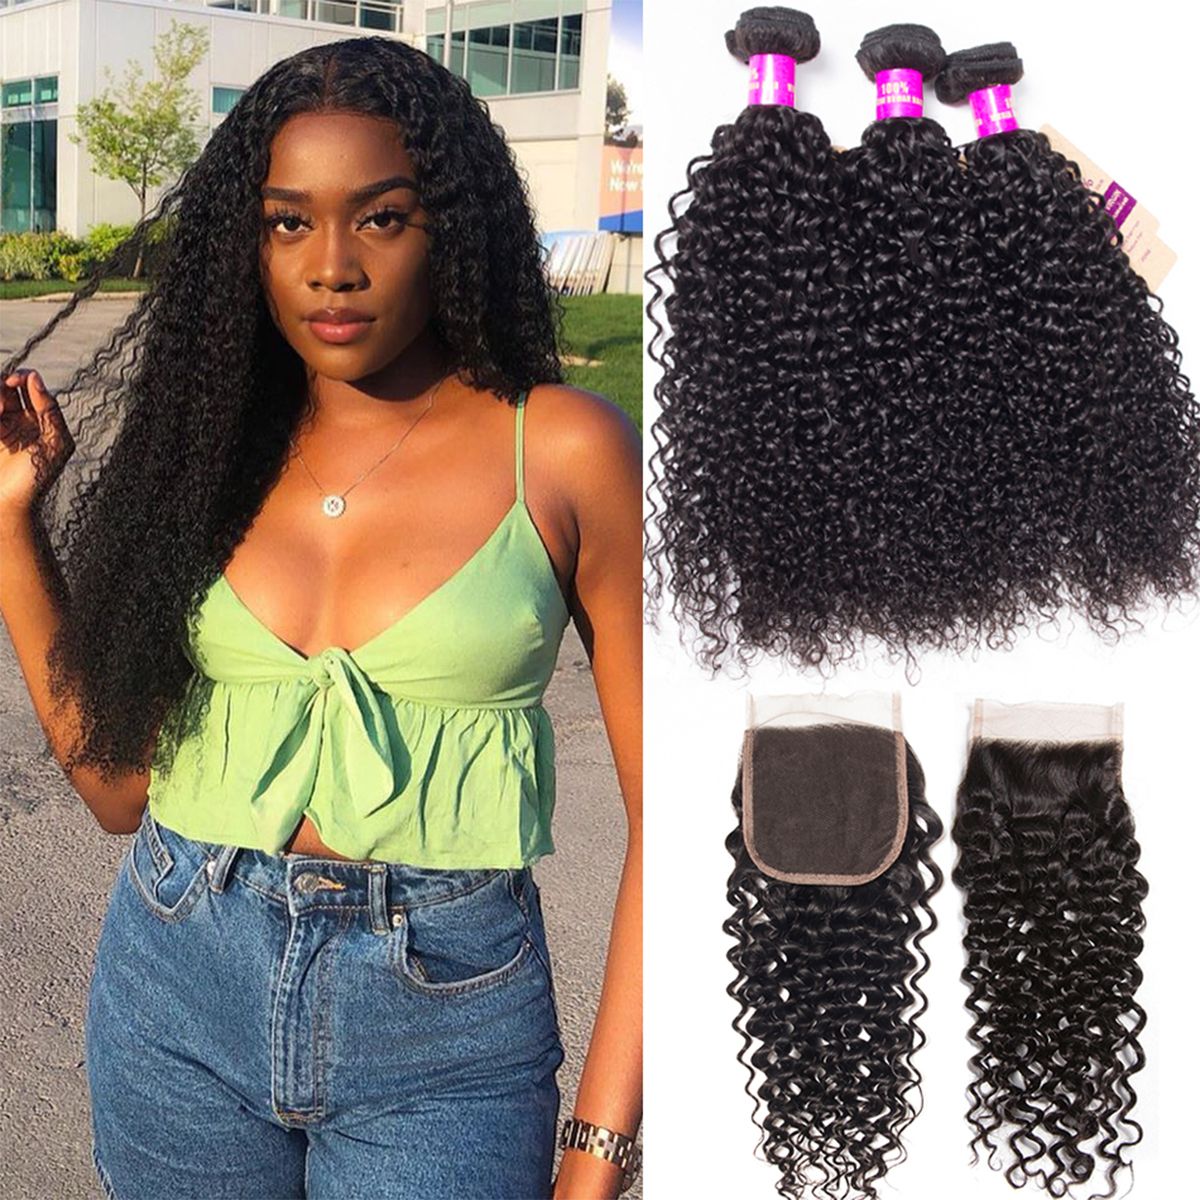 Tinashe Peruvian Curly Human Hair Weft With Closure 100% Virgin Human Hair 3 Bundles With Closure Best Curly